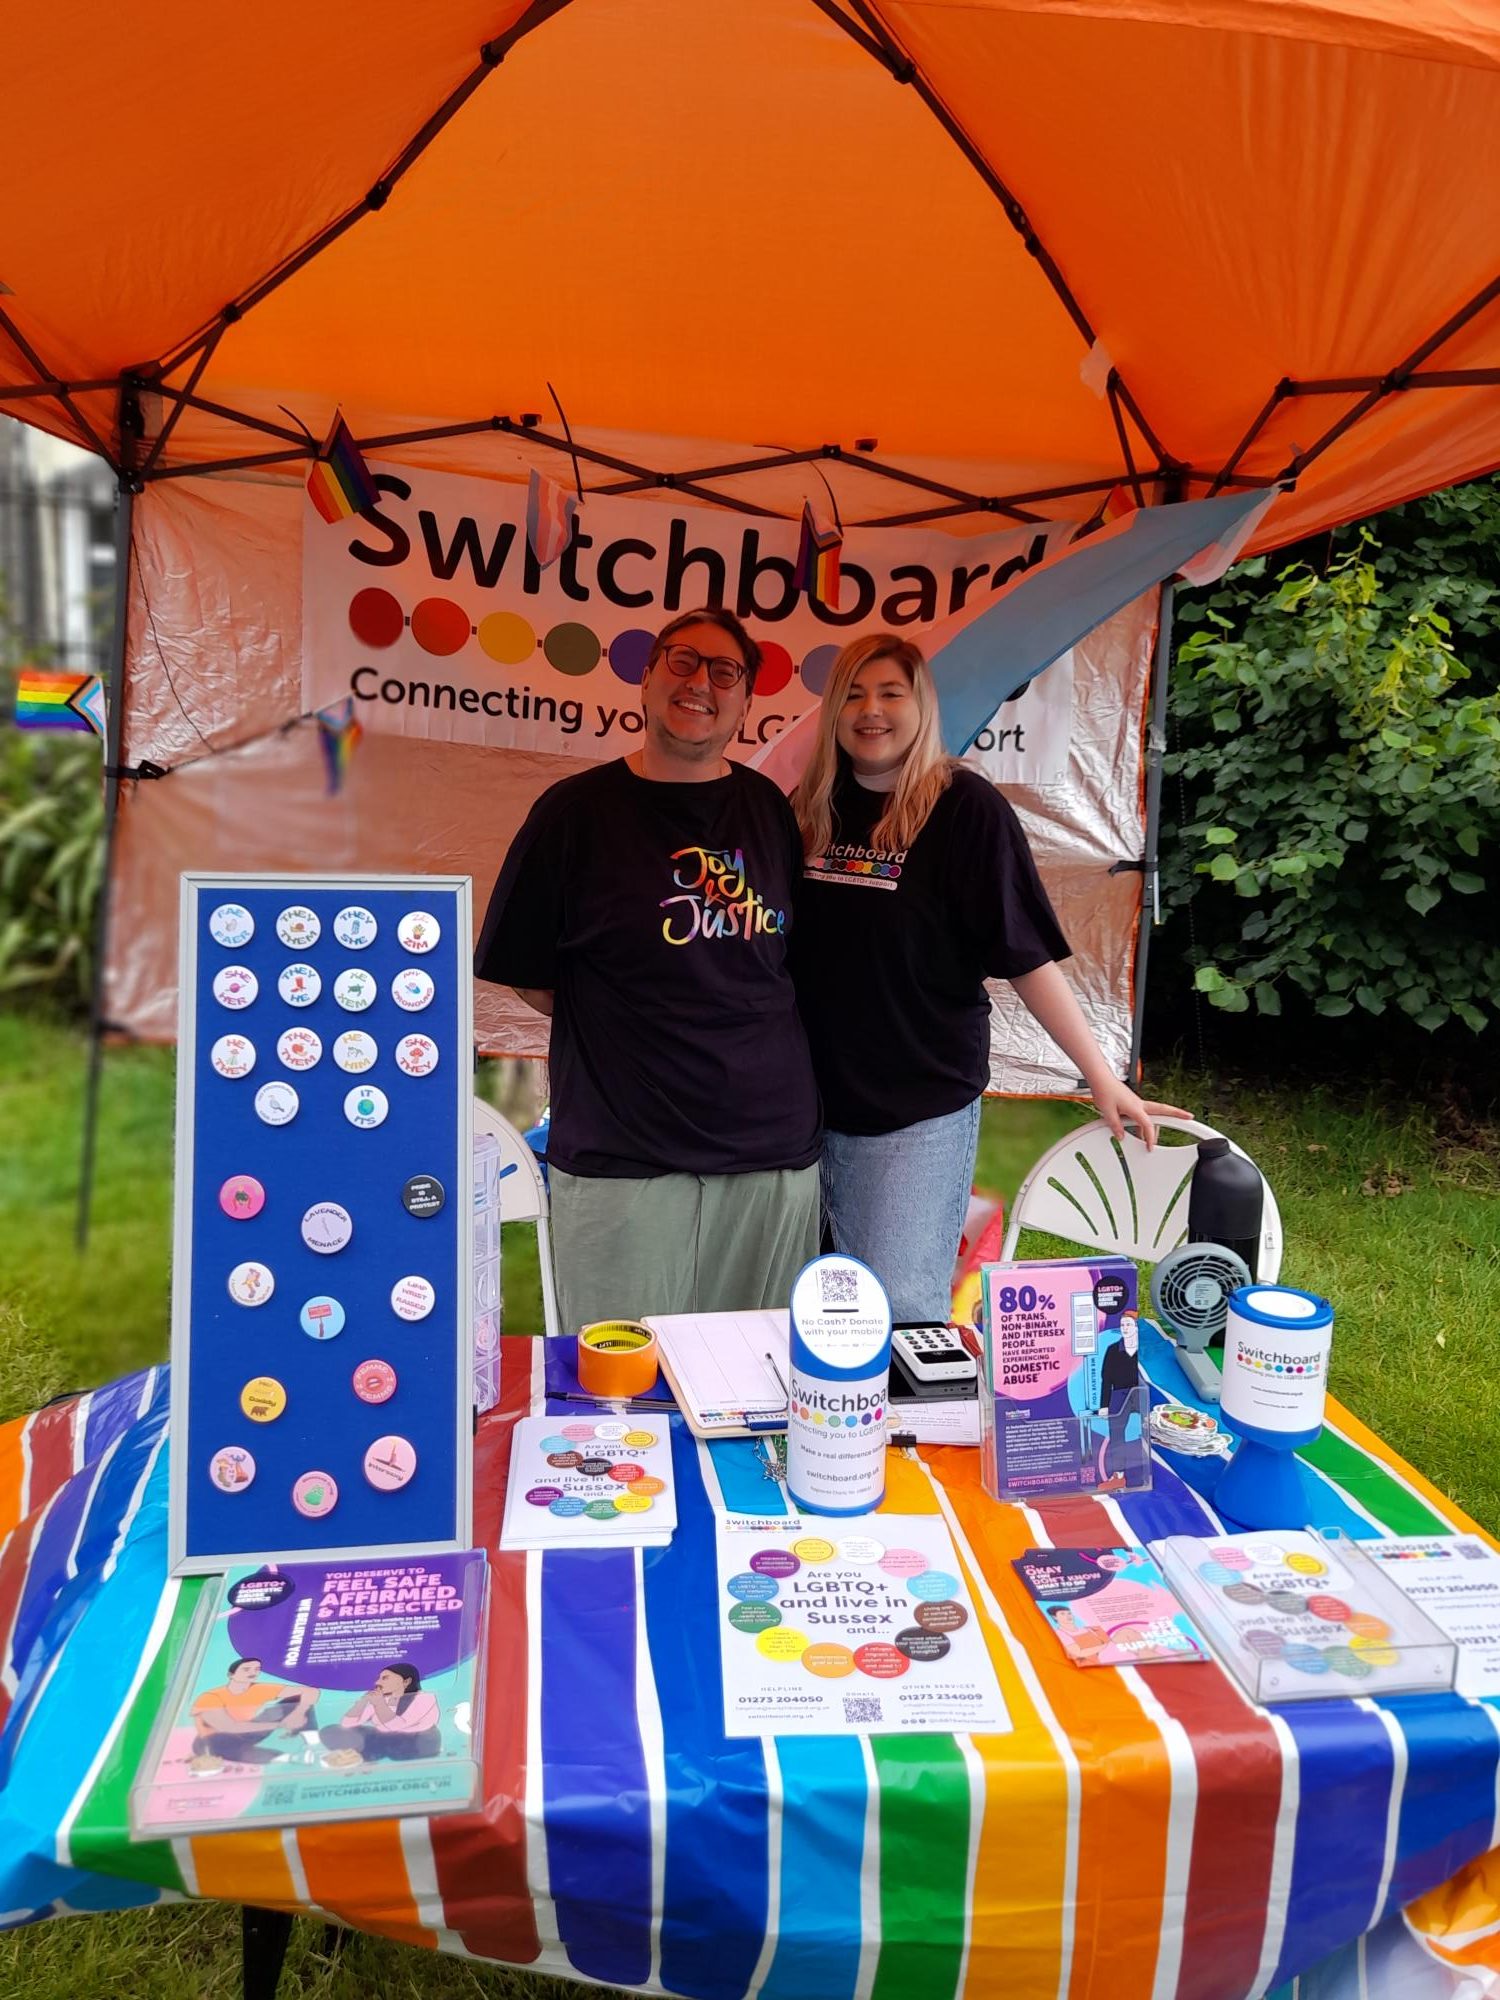 A photo of Raf (they/them) and Ciara (she/her) at Switchboard's stall for Trans Pride. They wear Switchboard's t-shirts, Raf's says "Joy & Justice" and Ciara's has Switchboard's logo on. In front of them are Switchboard's pronoun badges and leaflets advertising our services.